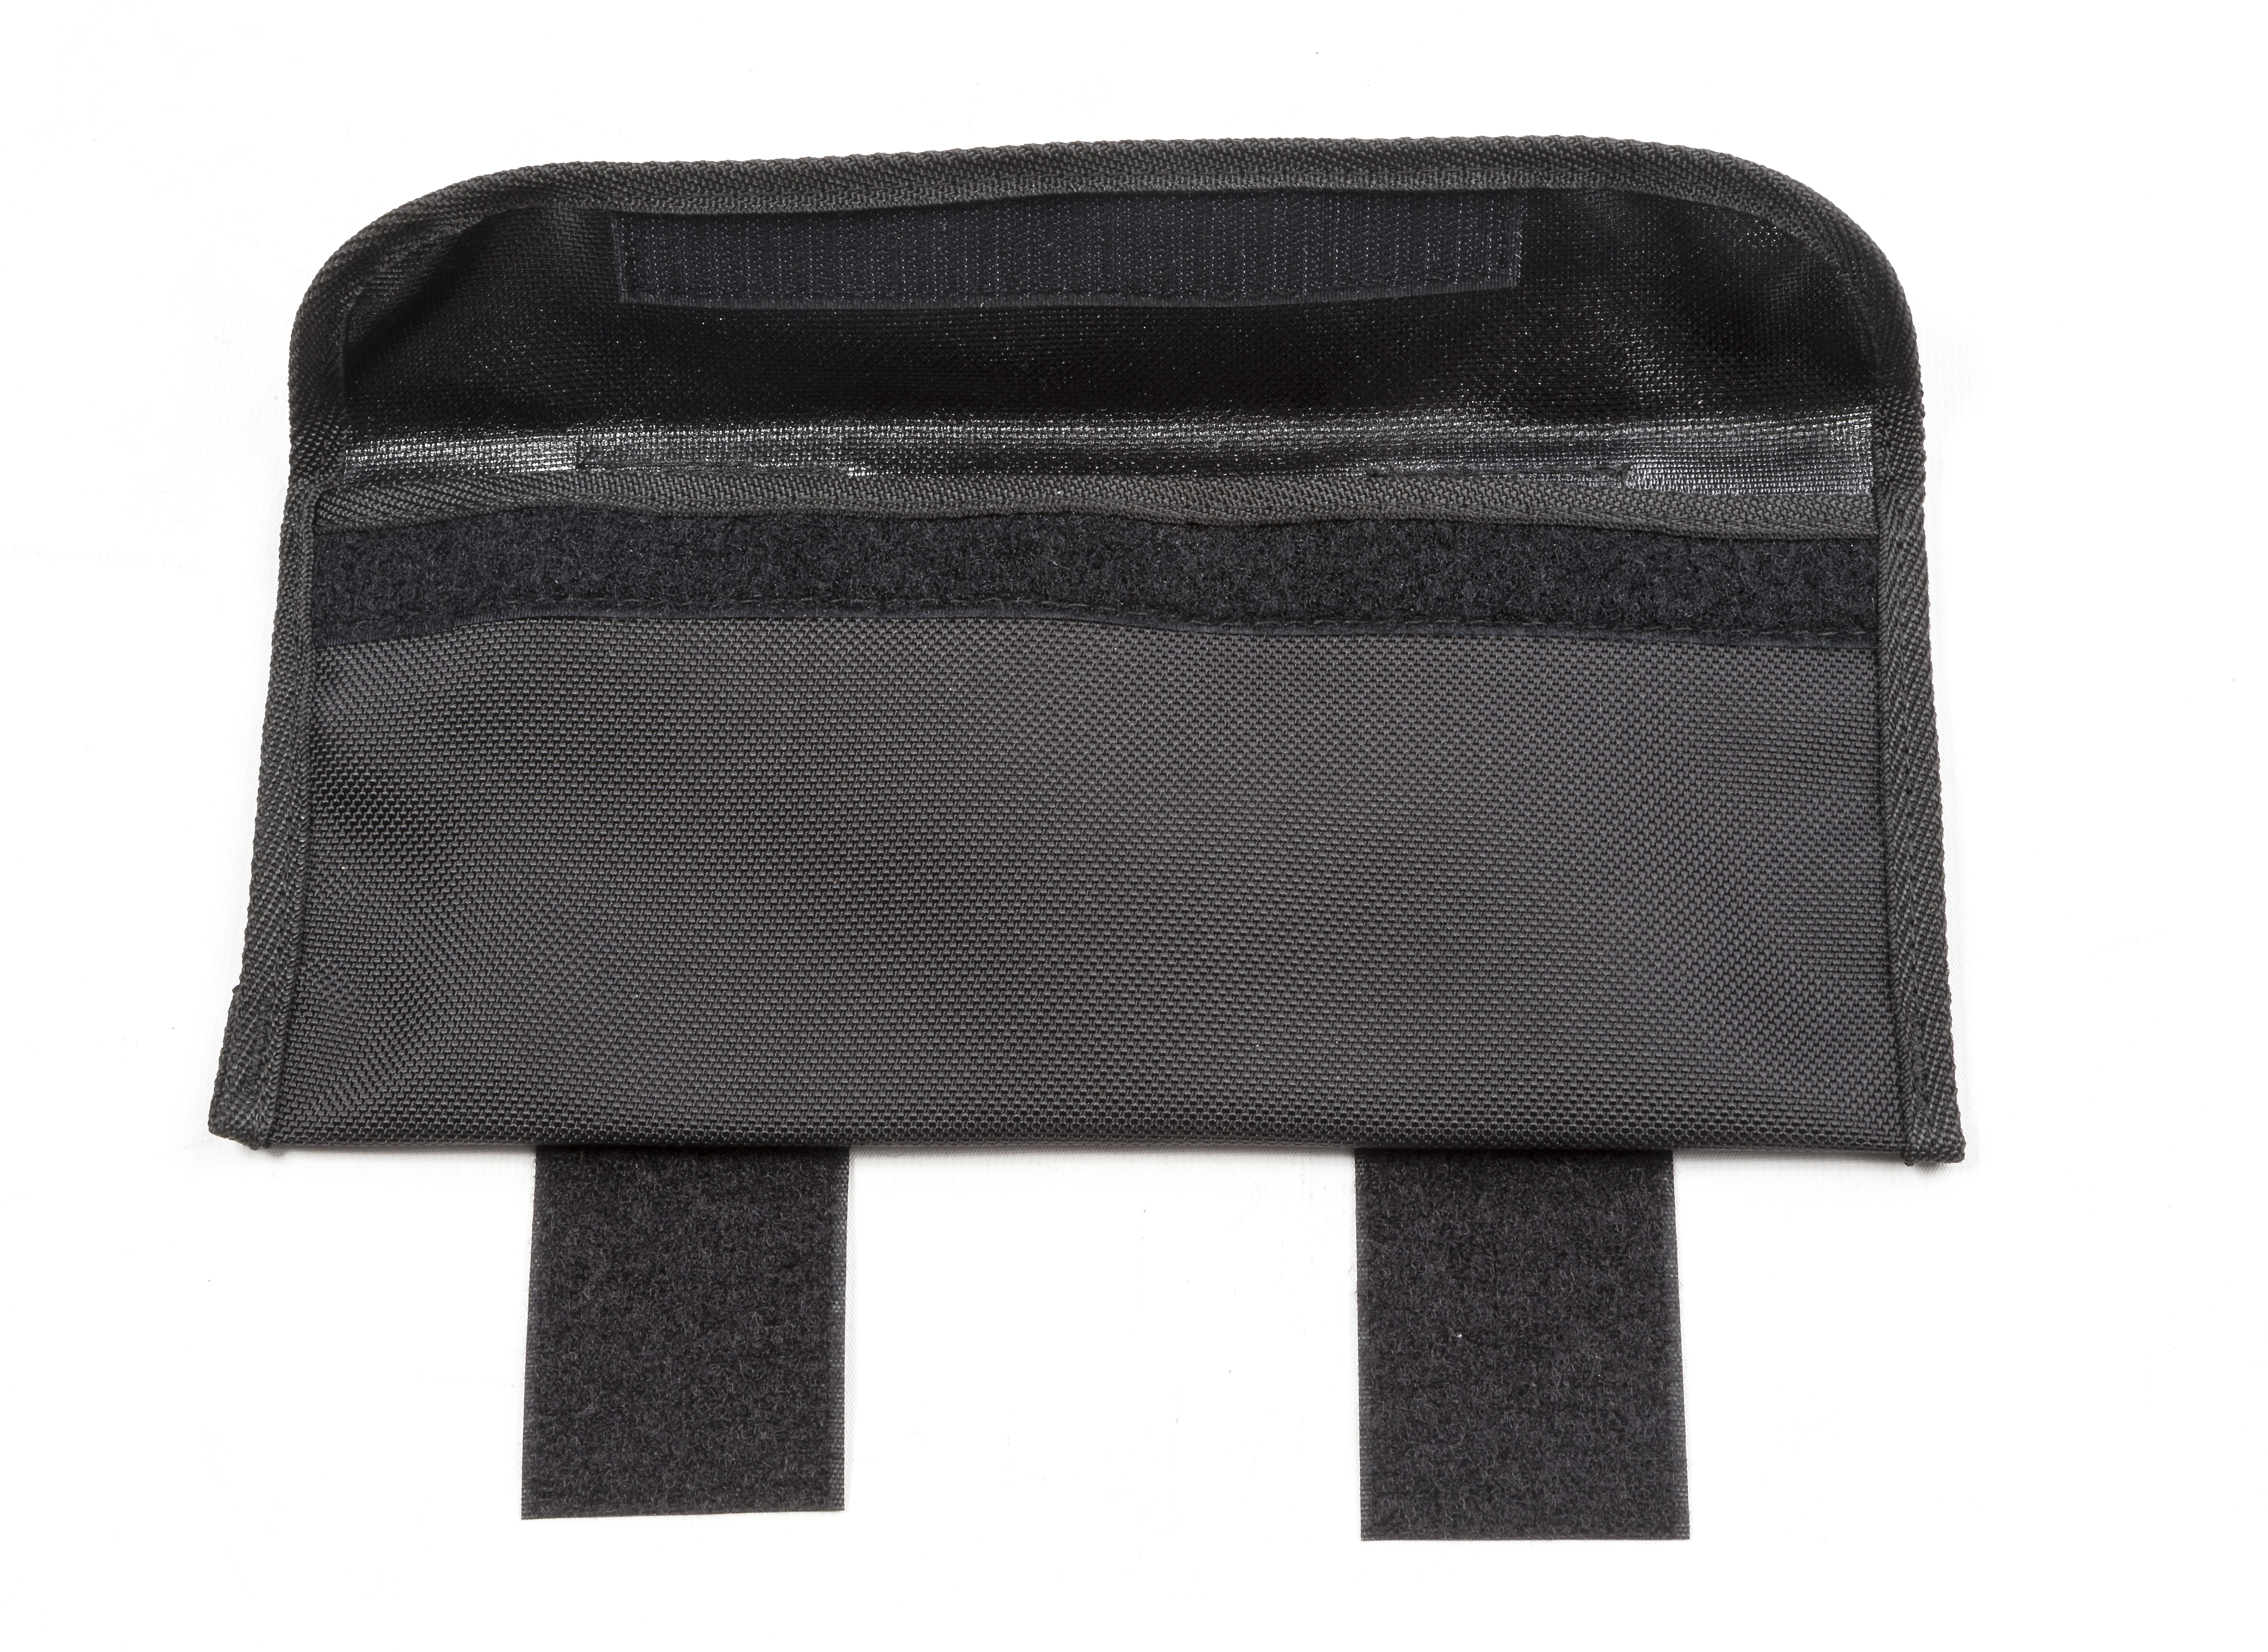 P80809 Tool Pouch – EasyStand